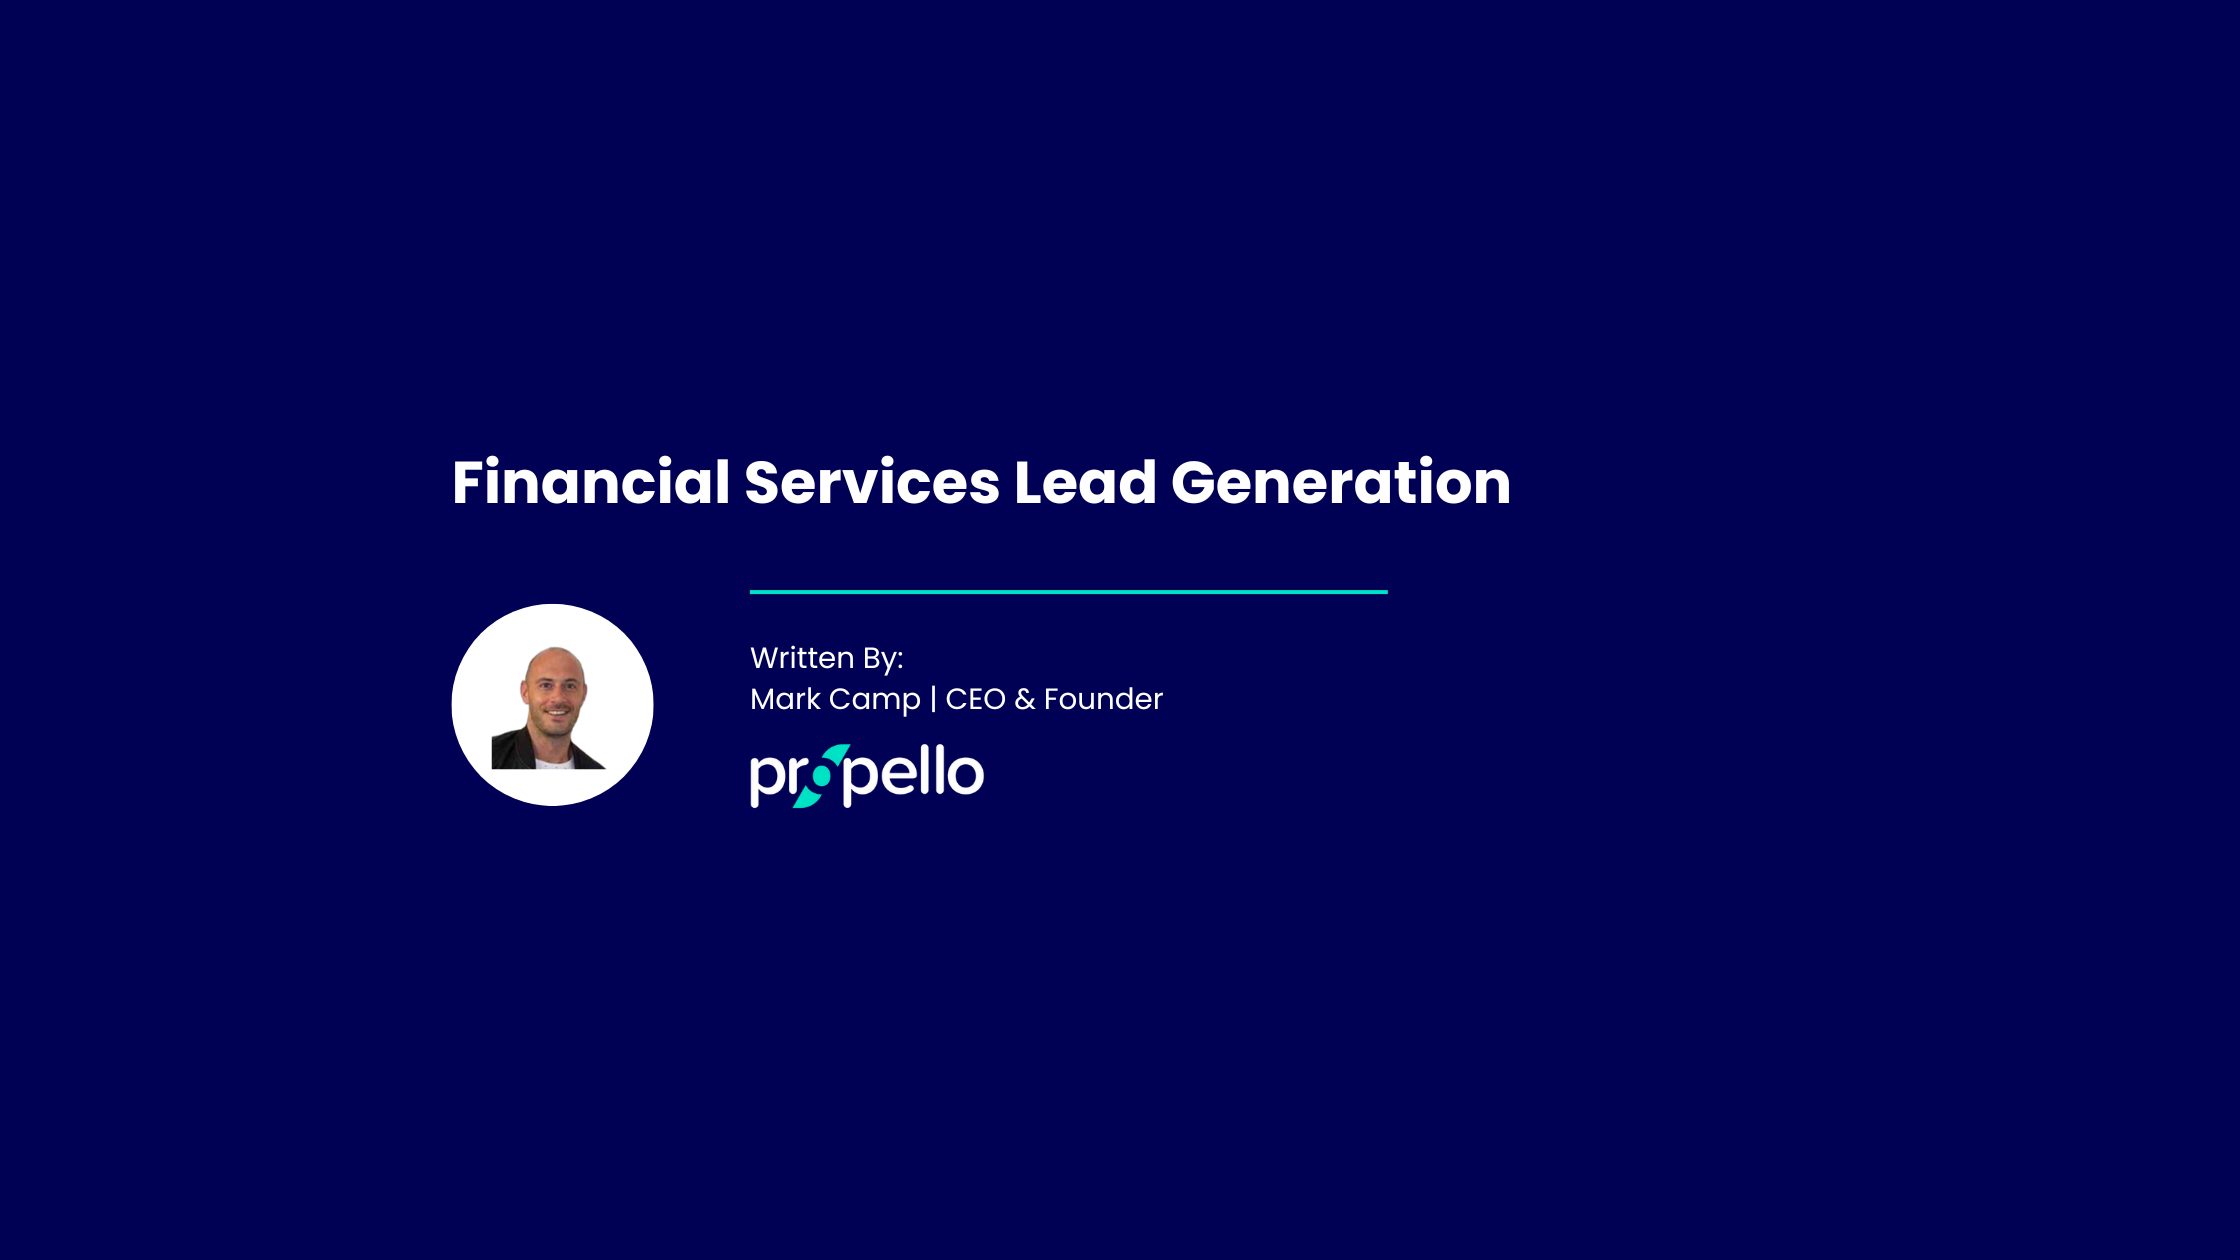 Financial Services Lead Generation